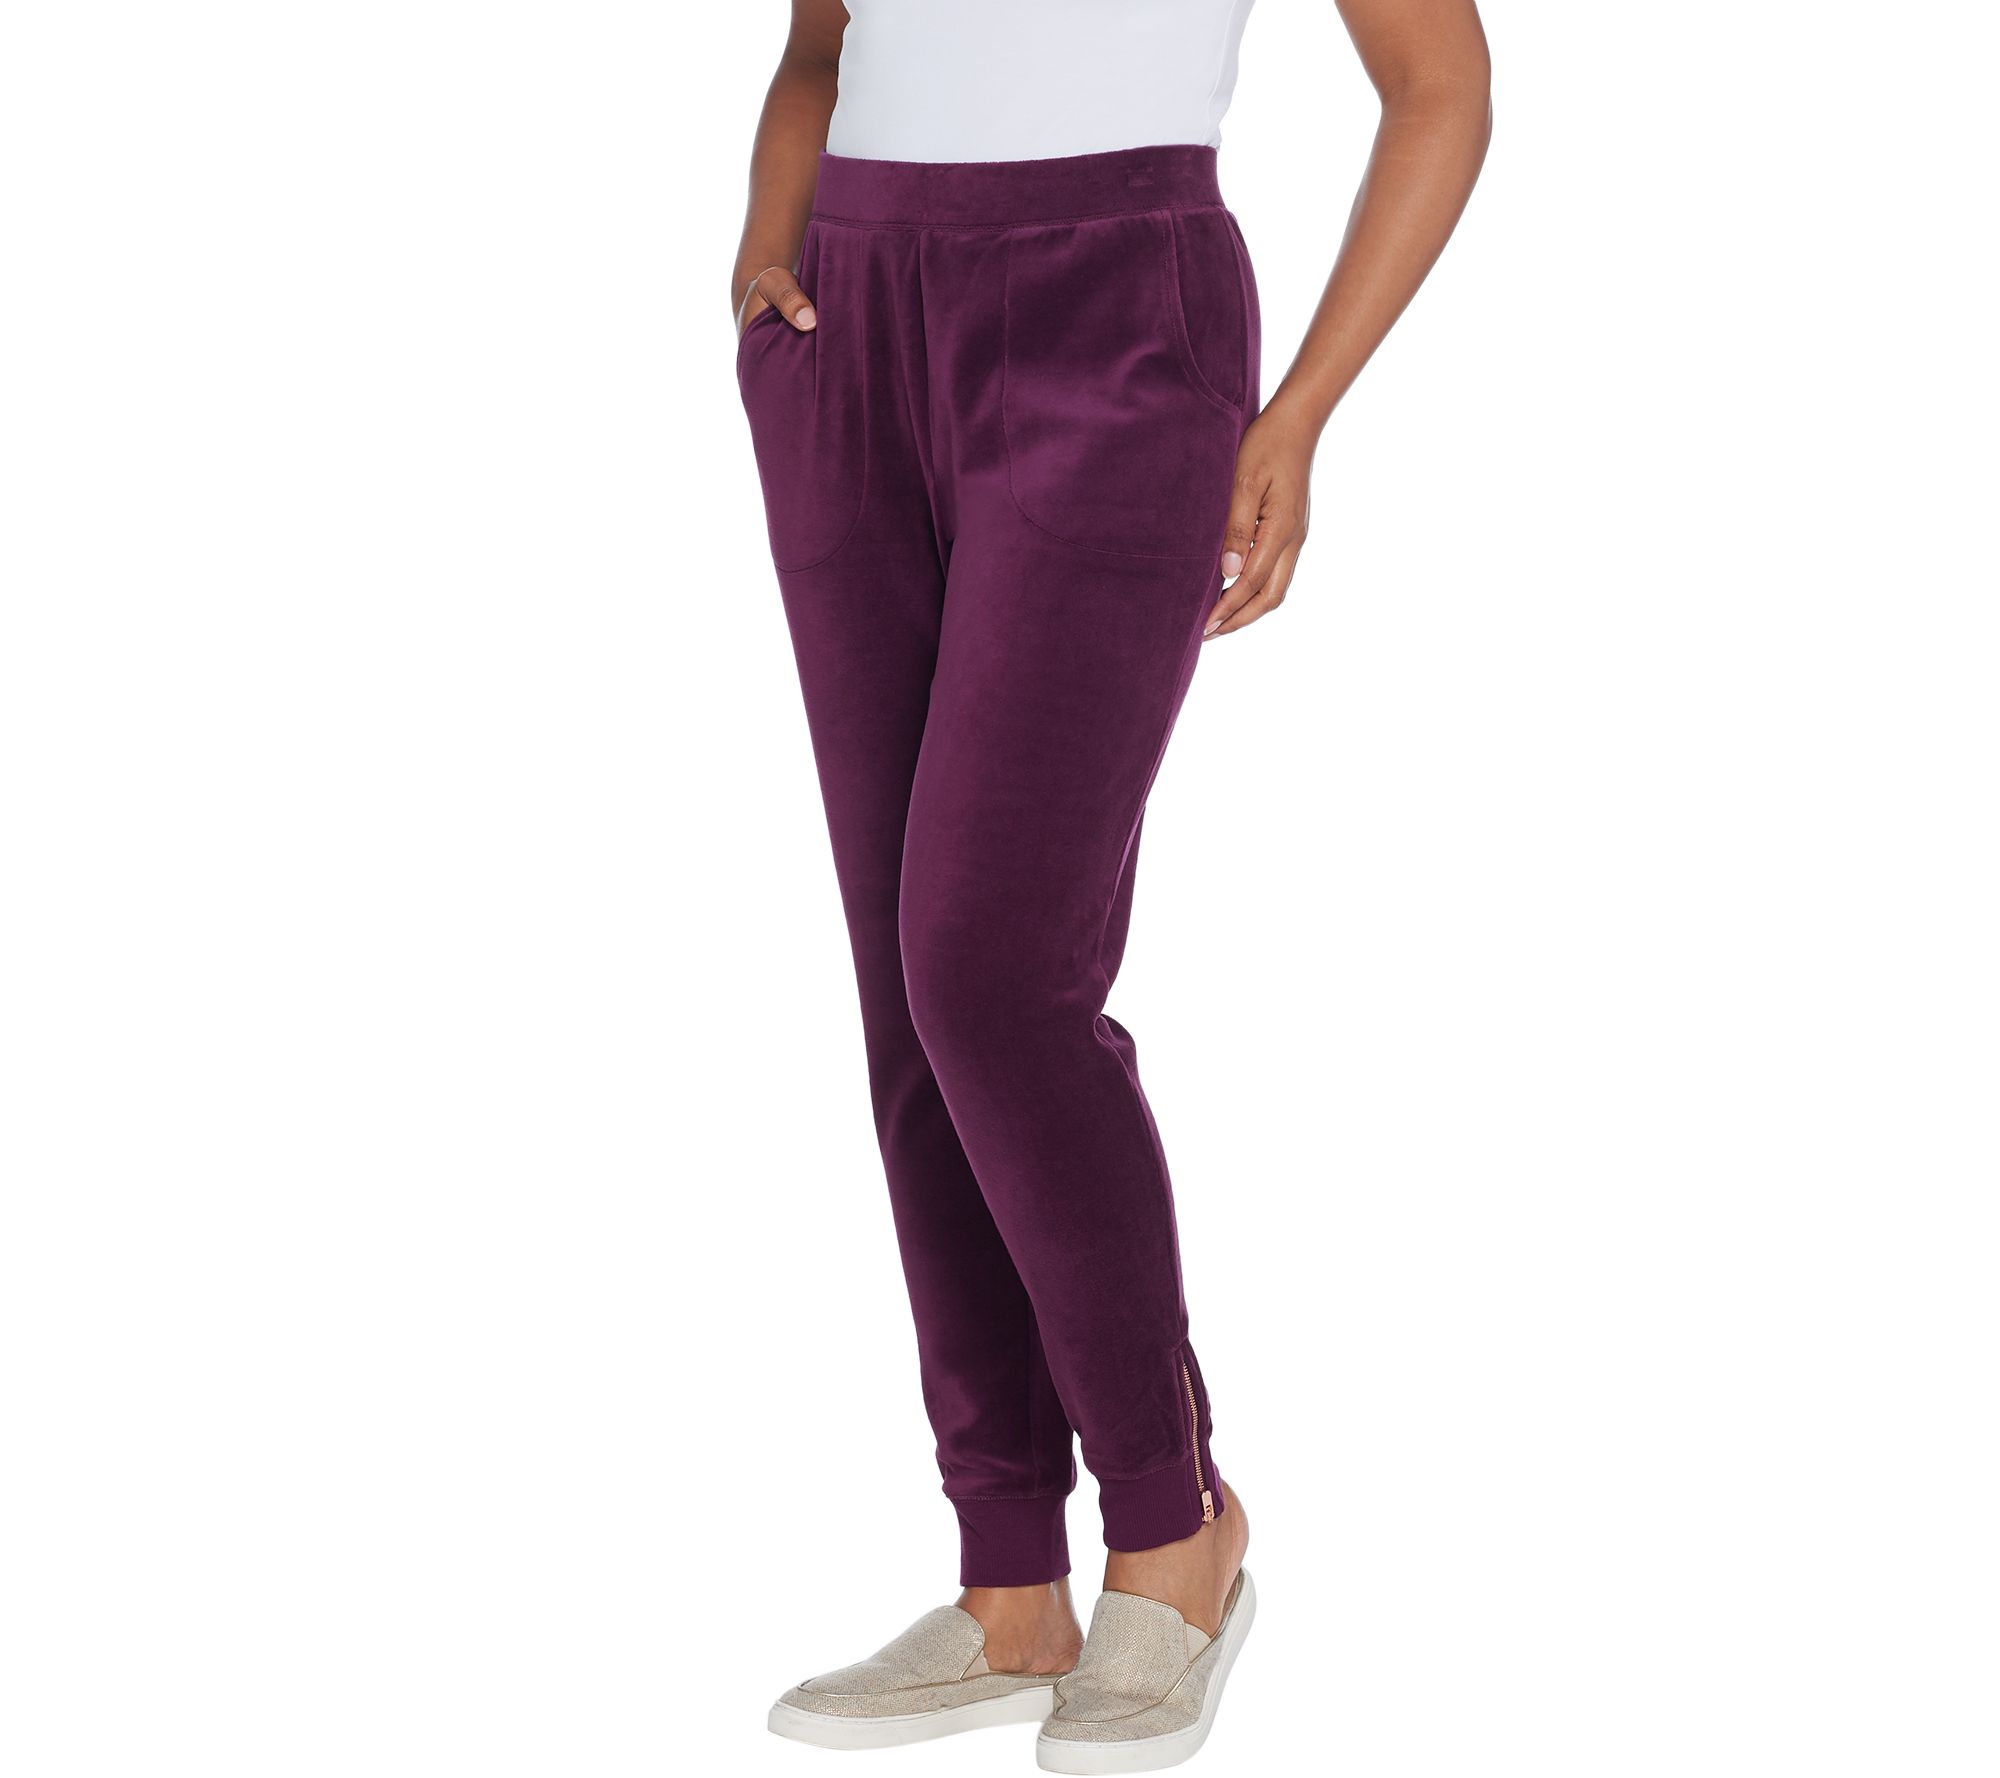 Denim & Co. Velour Joggers with Zippers at Cuffs - QVC.com